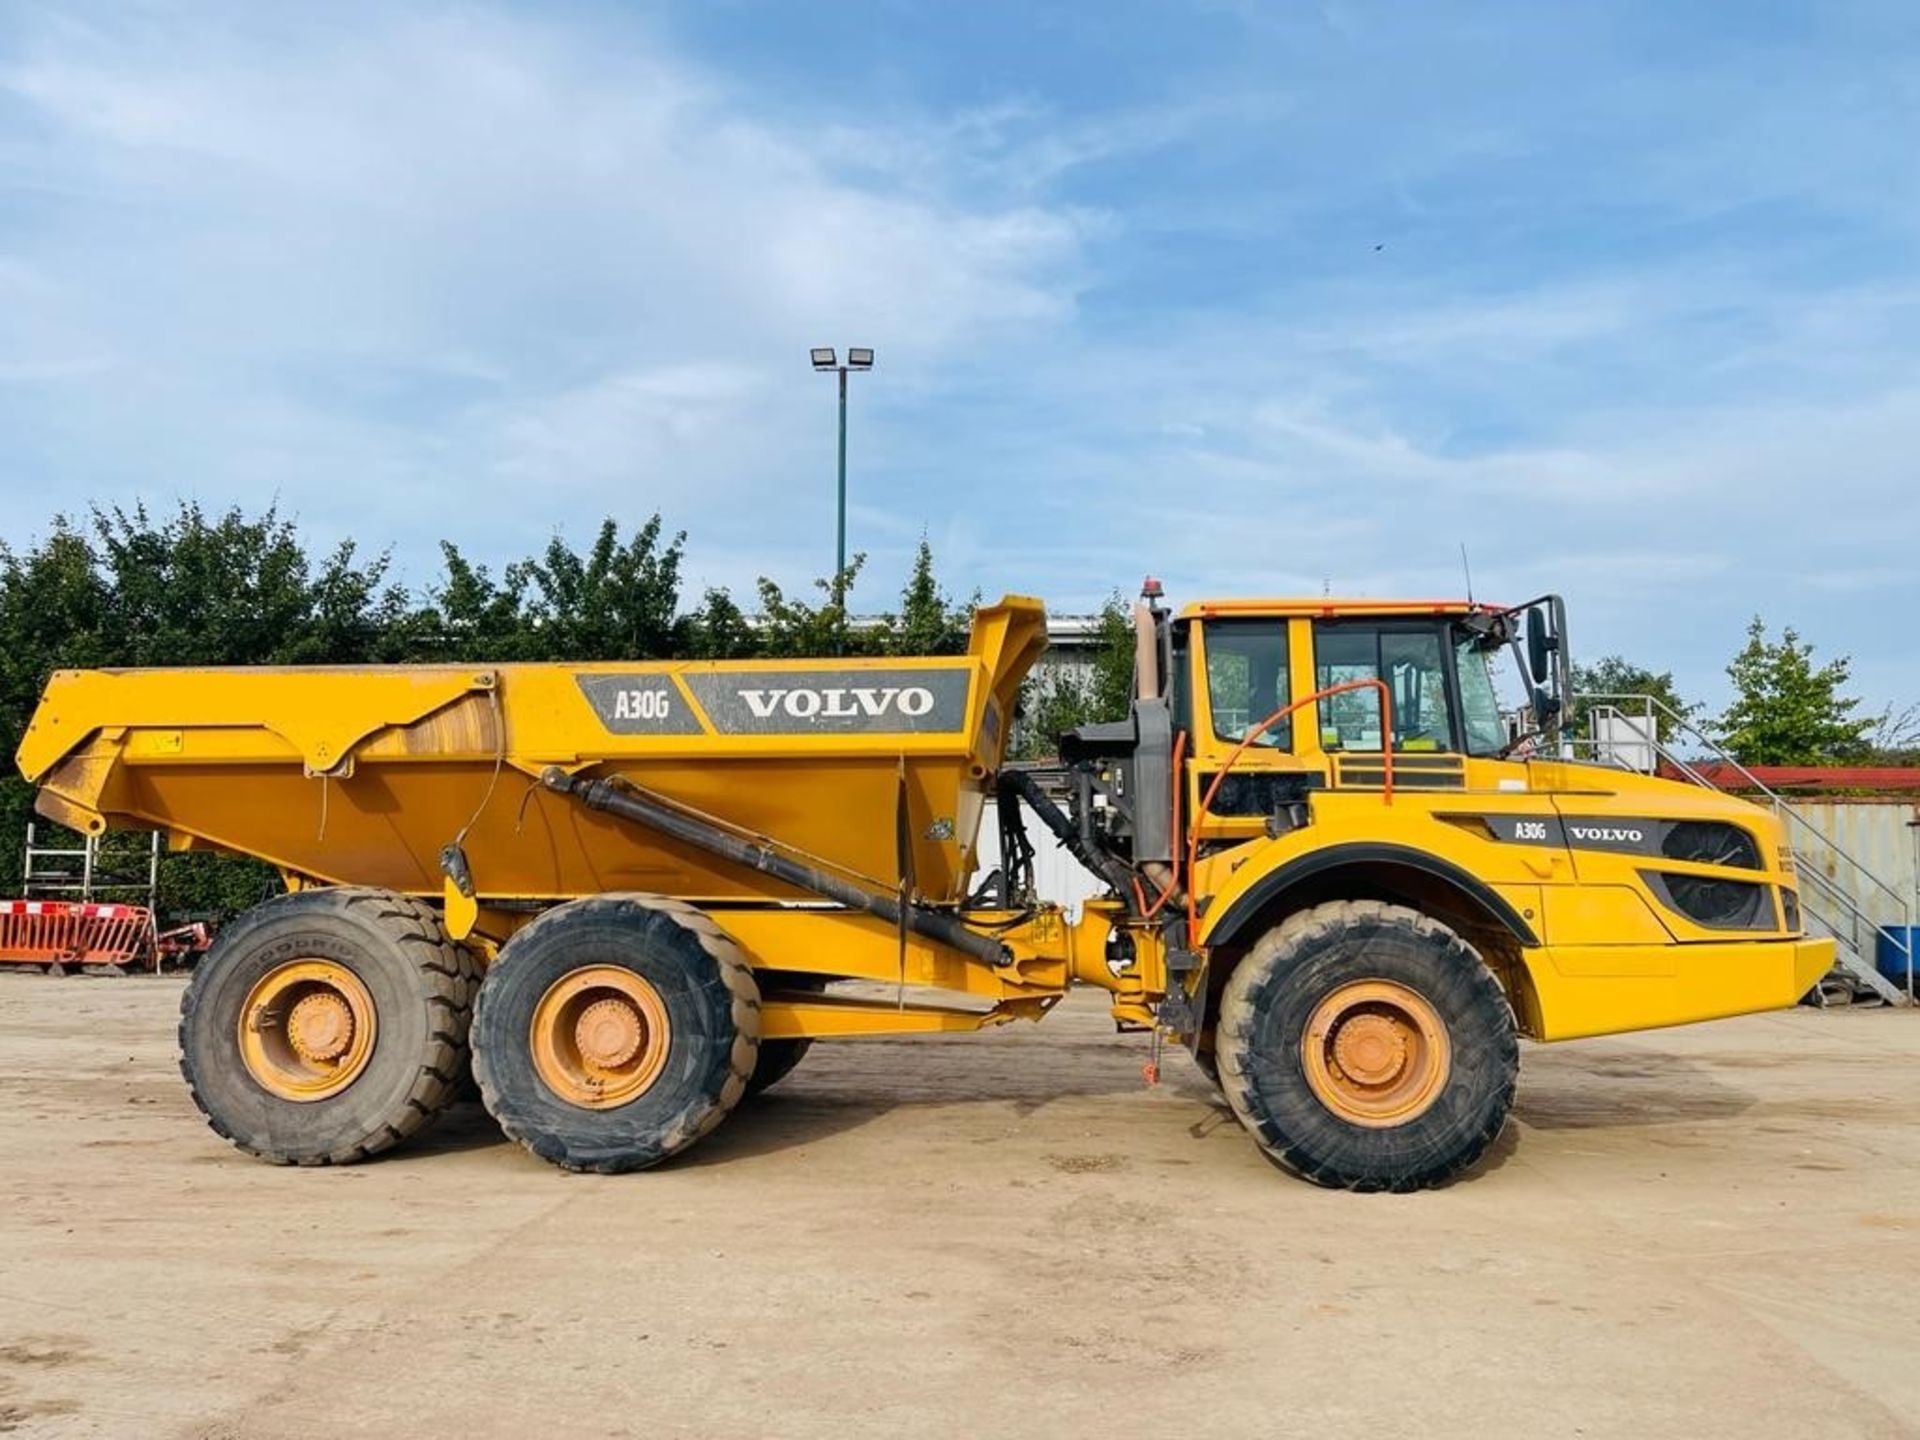 2021 - VOLVO A 30 G DUMP TRUCK - Image 2 of 20